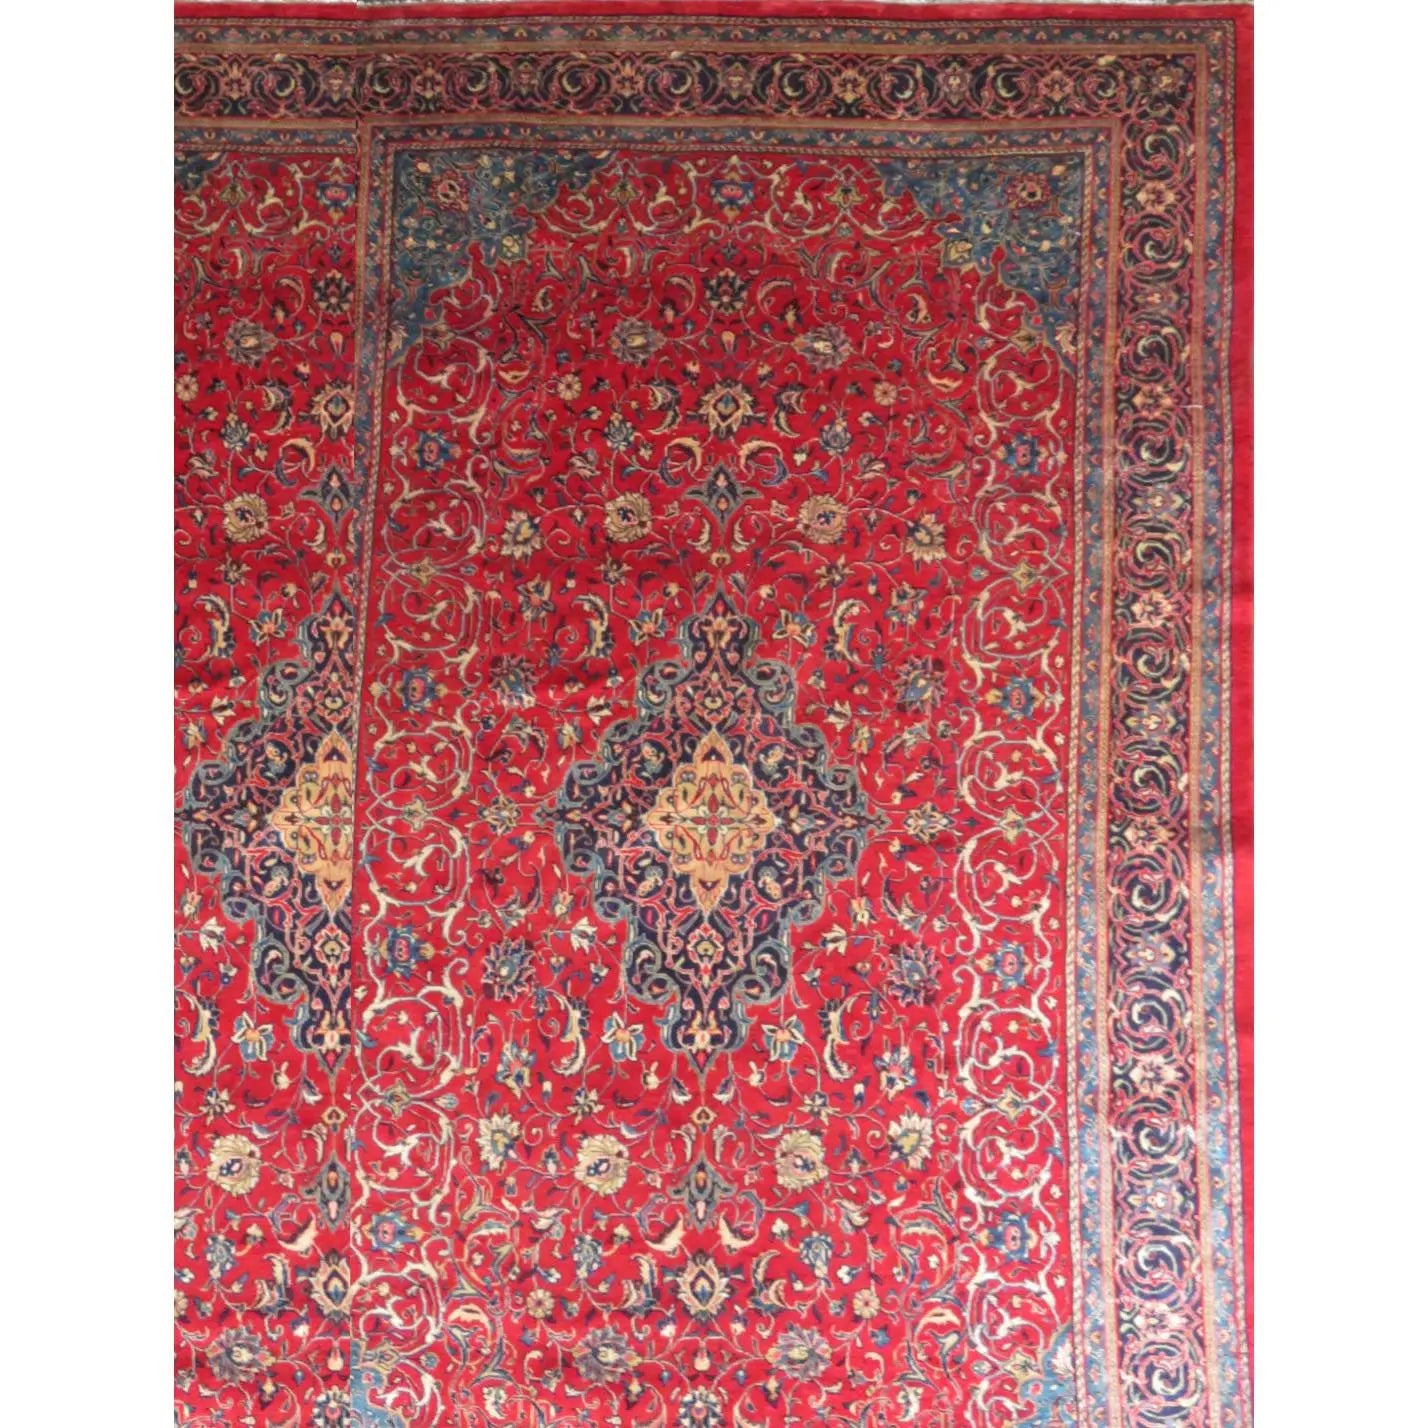 Hand-Knotted Persian Wool Rug – Luxurious Vintage Design, 16'7" x 9'5", Artisan Crafted, Perfect for Living Room